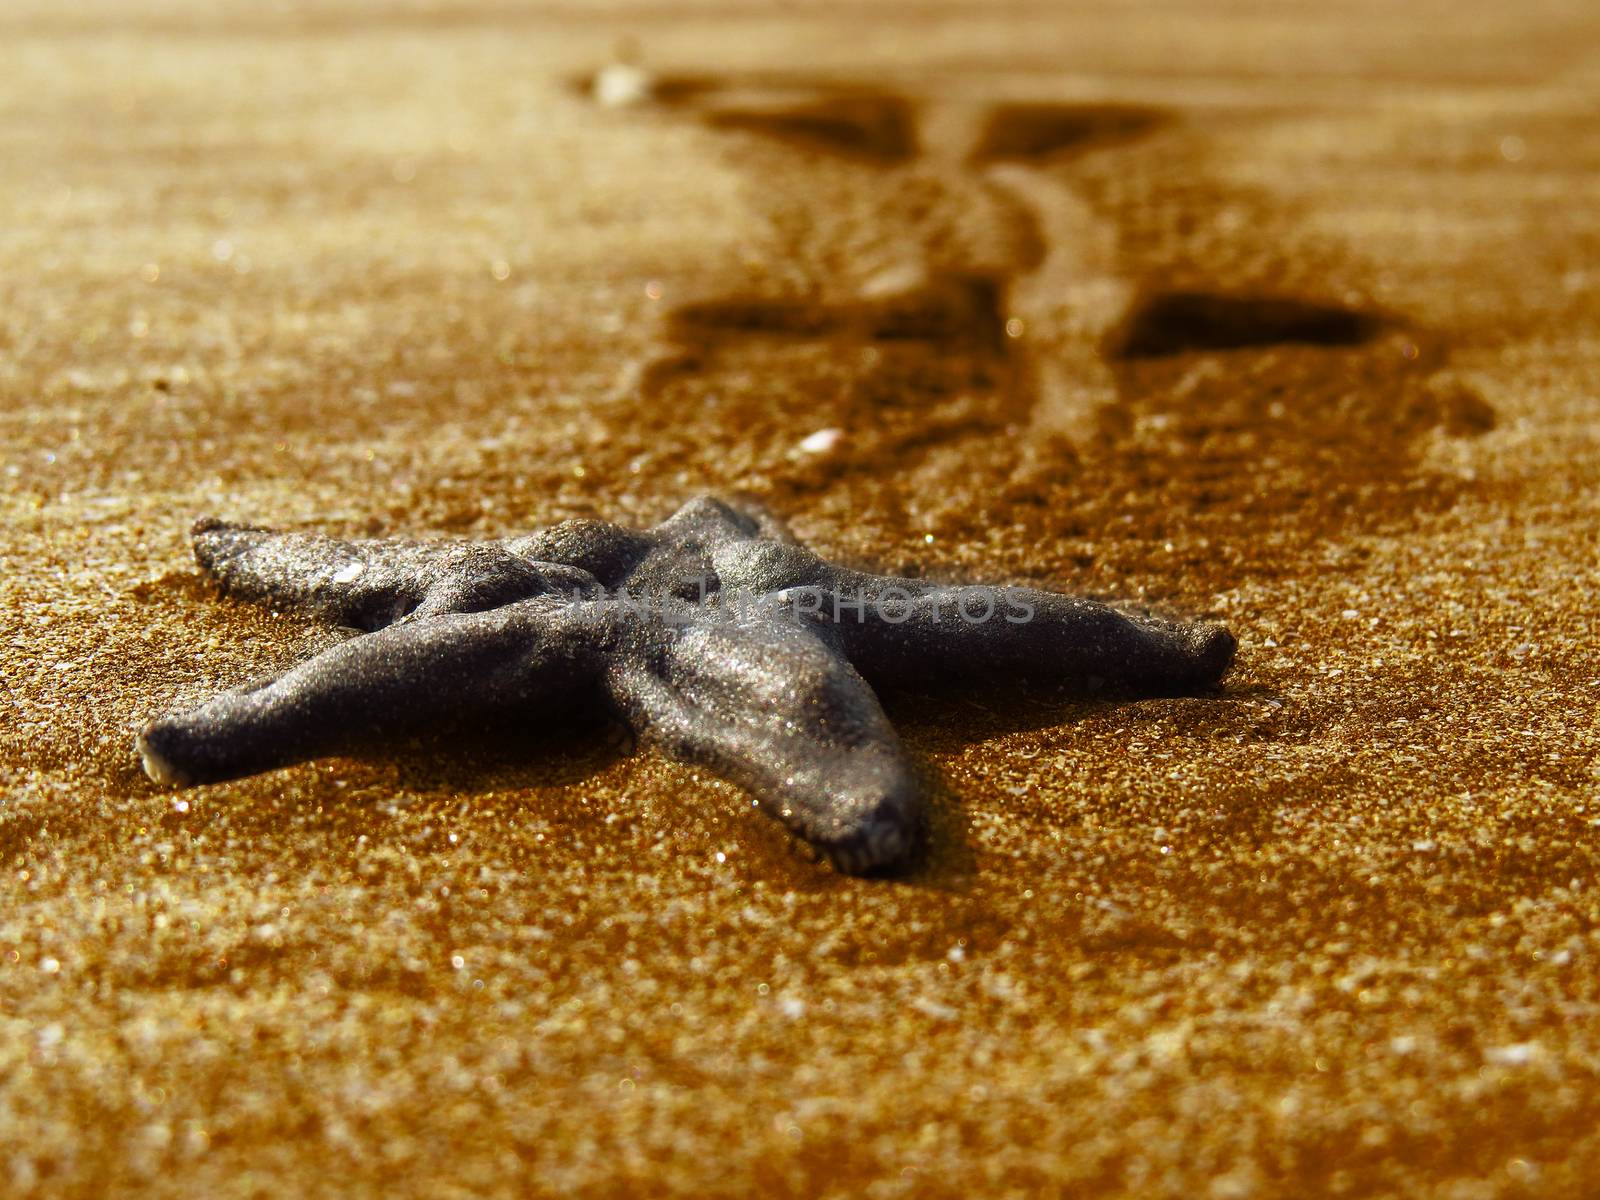 A beautiful starfish in shiny golden sands on an Indian beach.